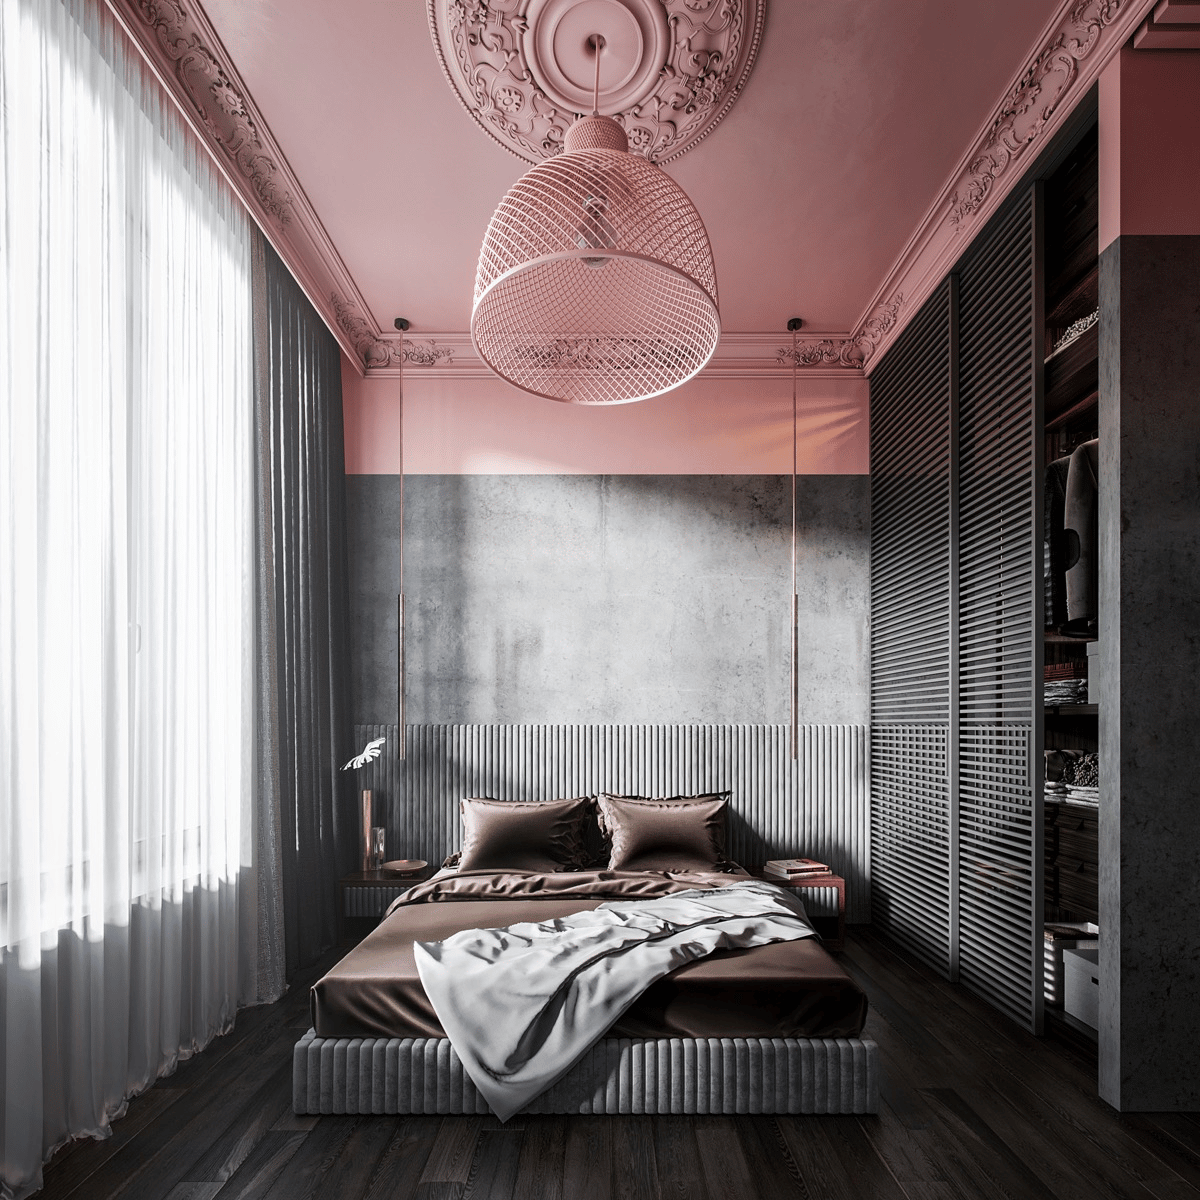 Blush and black colors can create stunning ambiance